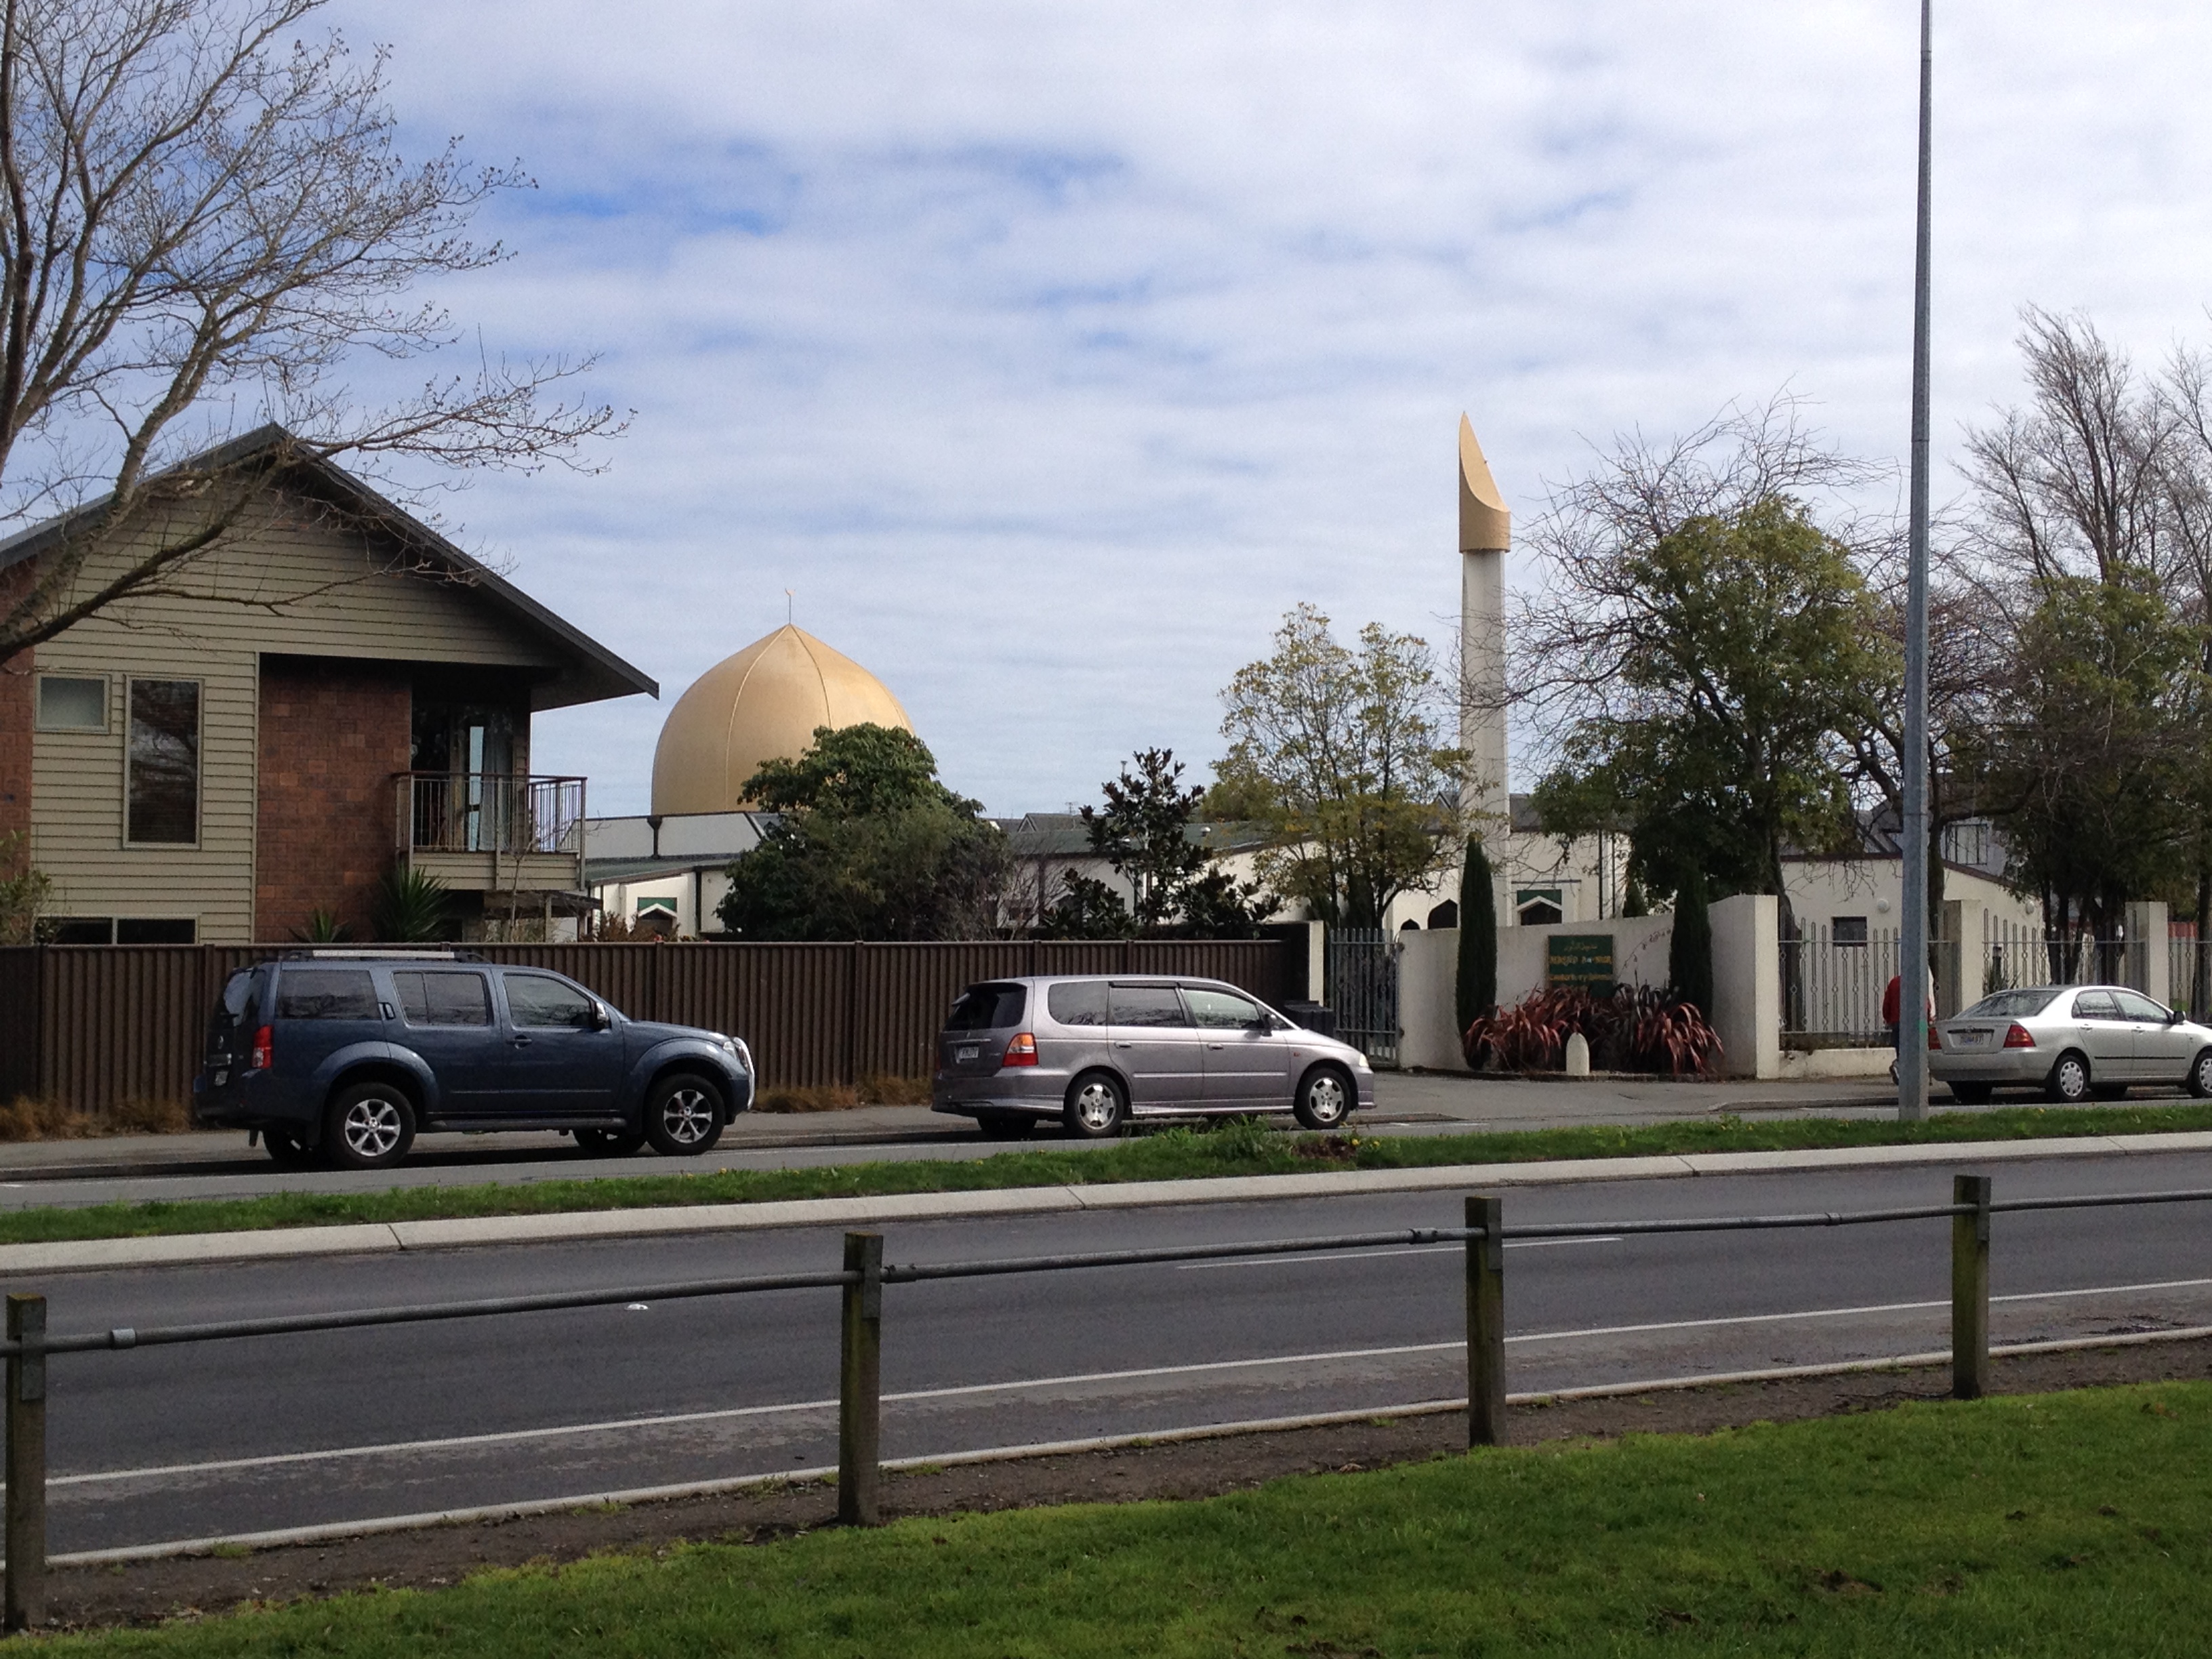 NZ's Royal Commission inquiry to look into Christchurch's mosques shootings 